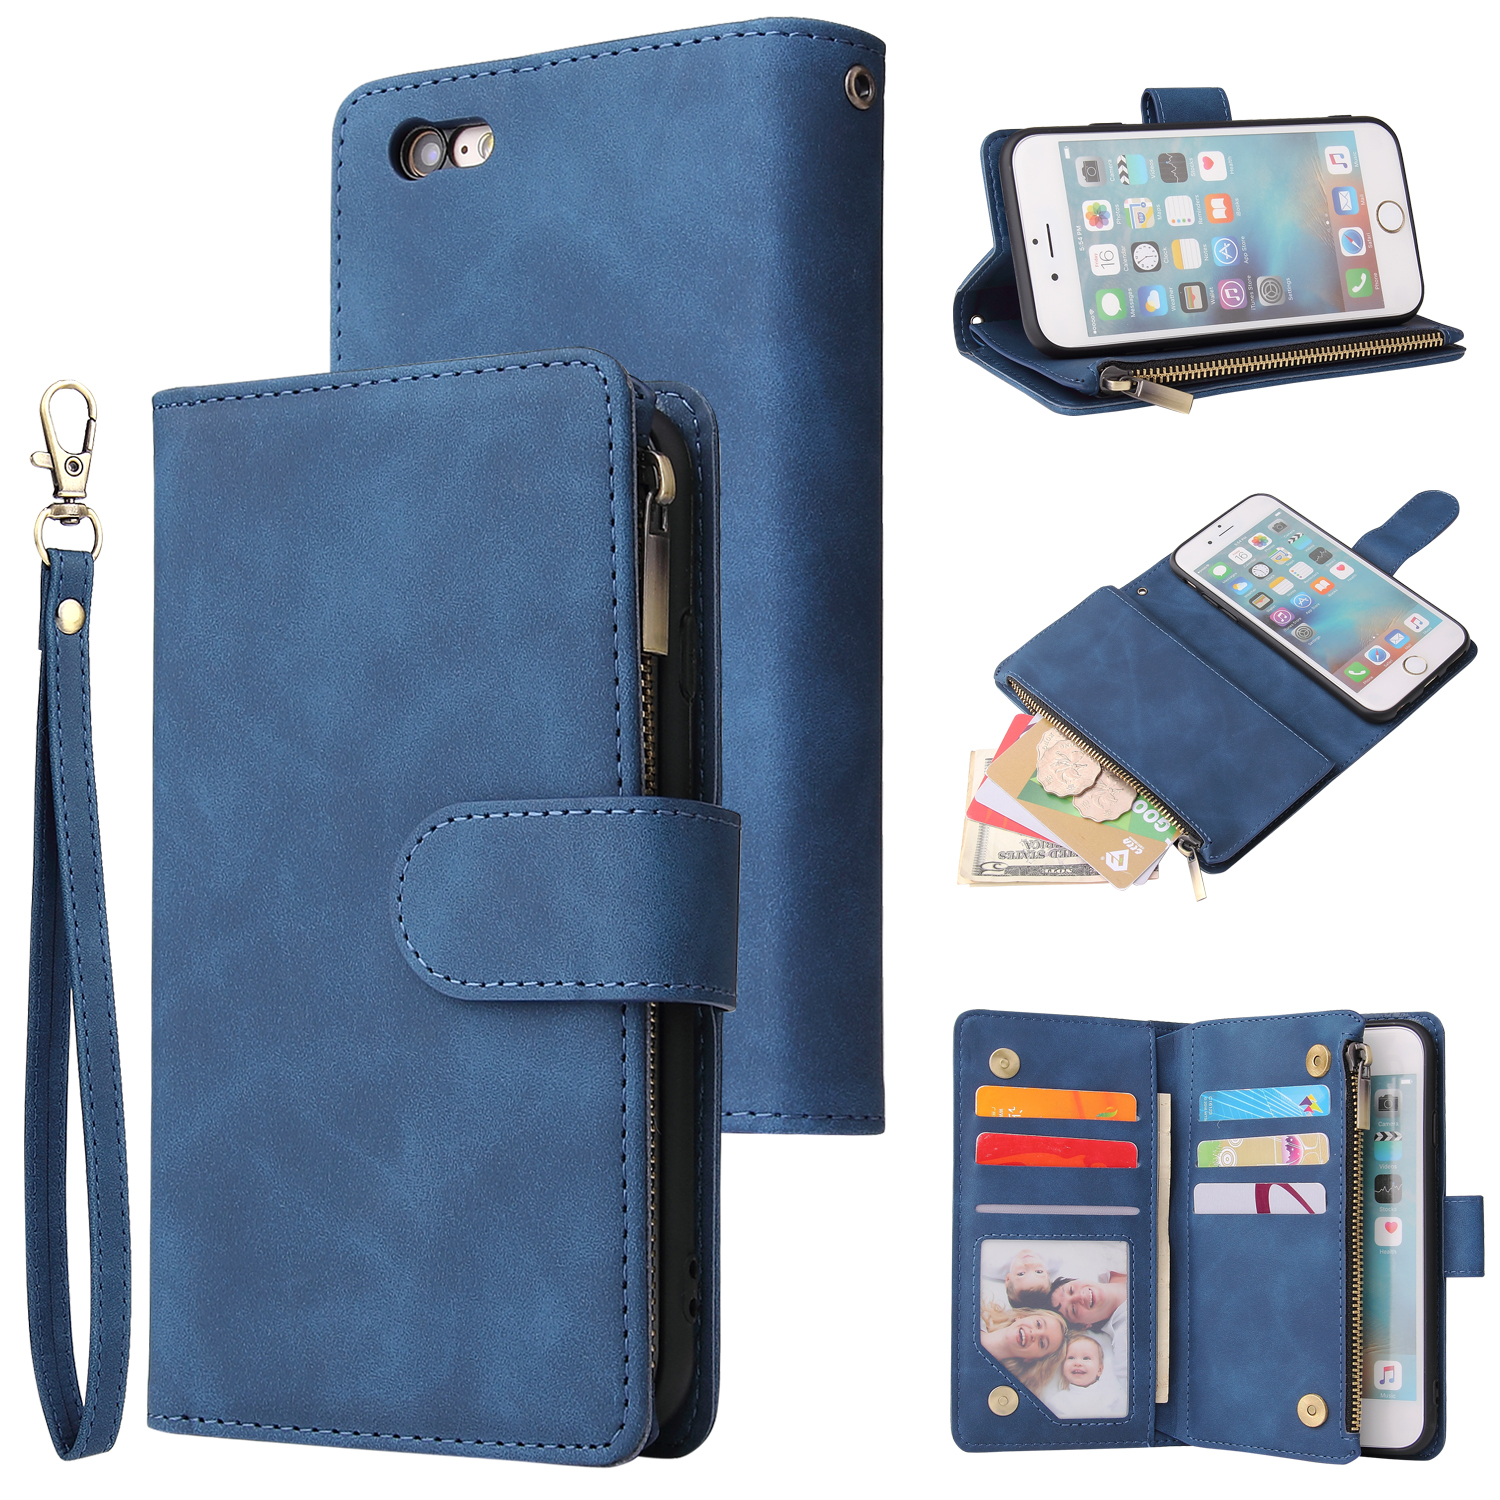 For iPhone 6 / 6S iPhone 6 plus / 6S plus iPhone 7 / 8 iPhone 7 plus / 8 plus Smart Phone Cover Coin Pocket with Cards Bracket Zipper Phone PU Leather Case Phone Cover  iPhone 6 plus / 6S plus